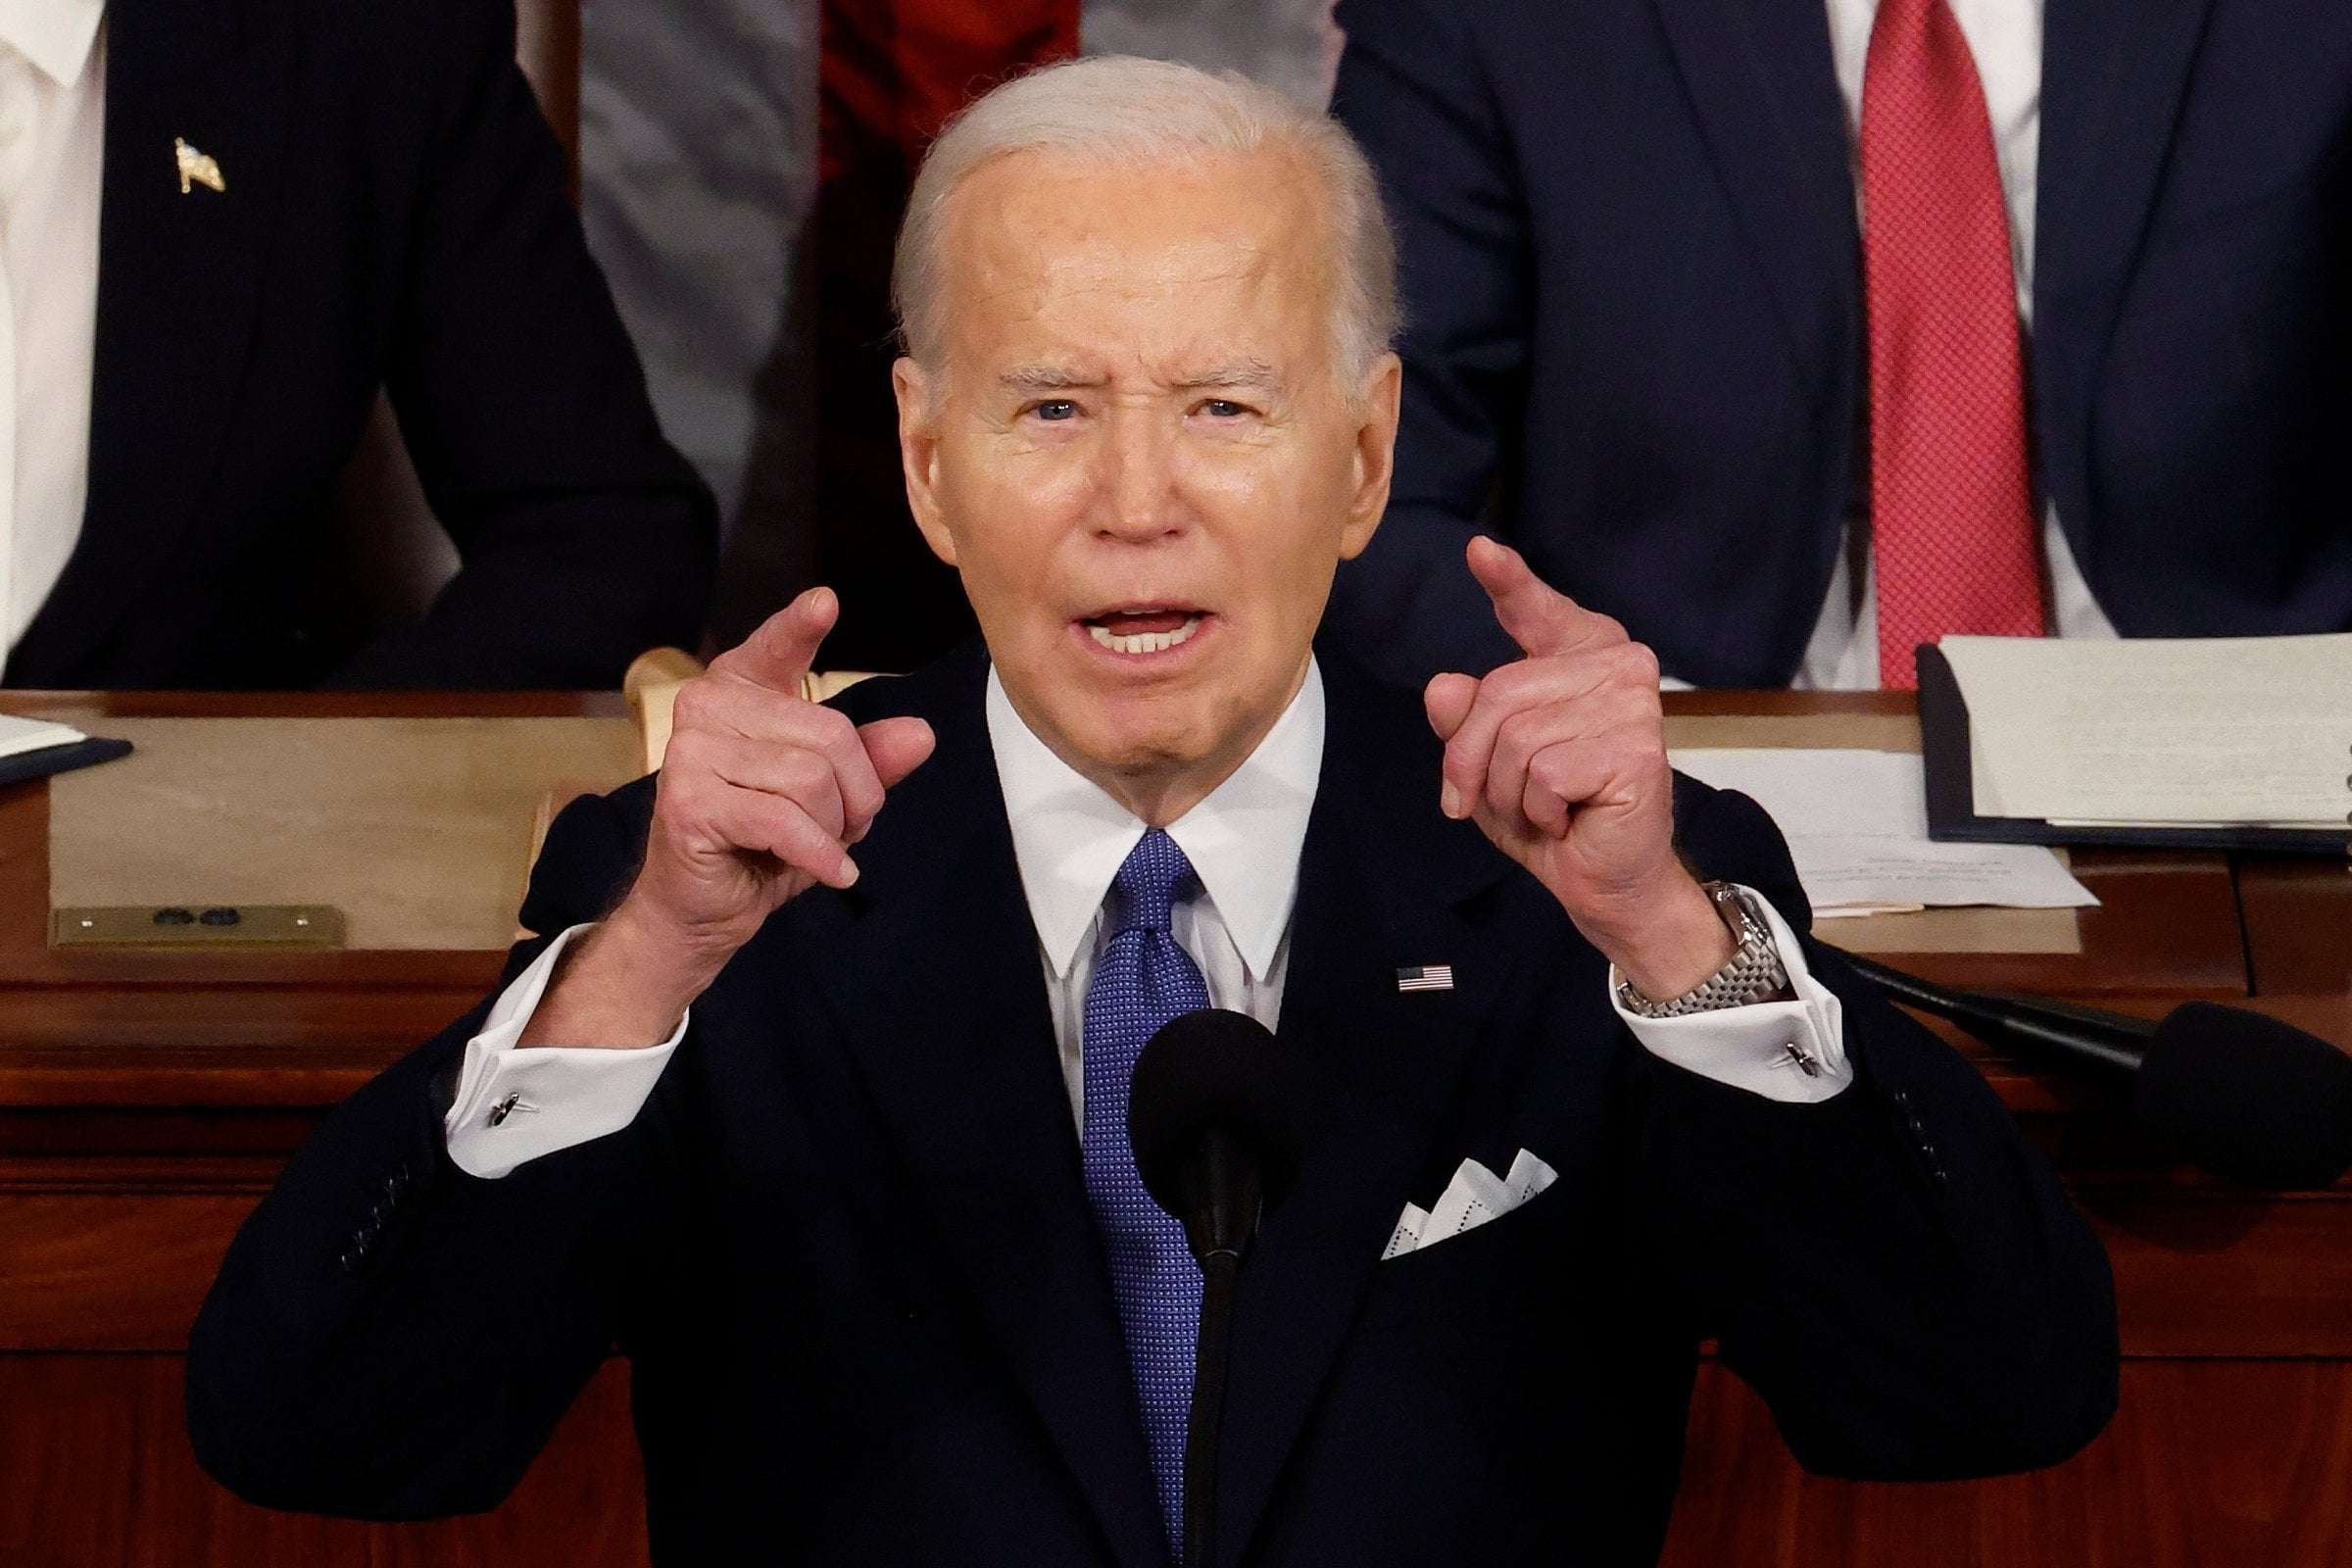 image for Republicans Complain Joe Biden Had Too Much Energy at SOTU